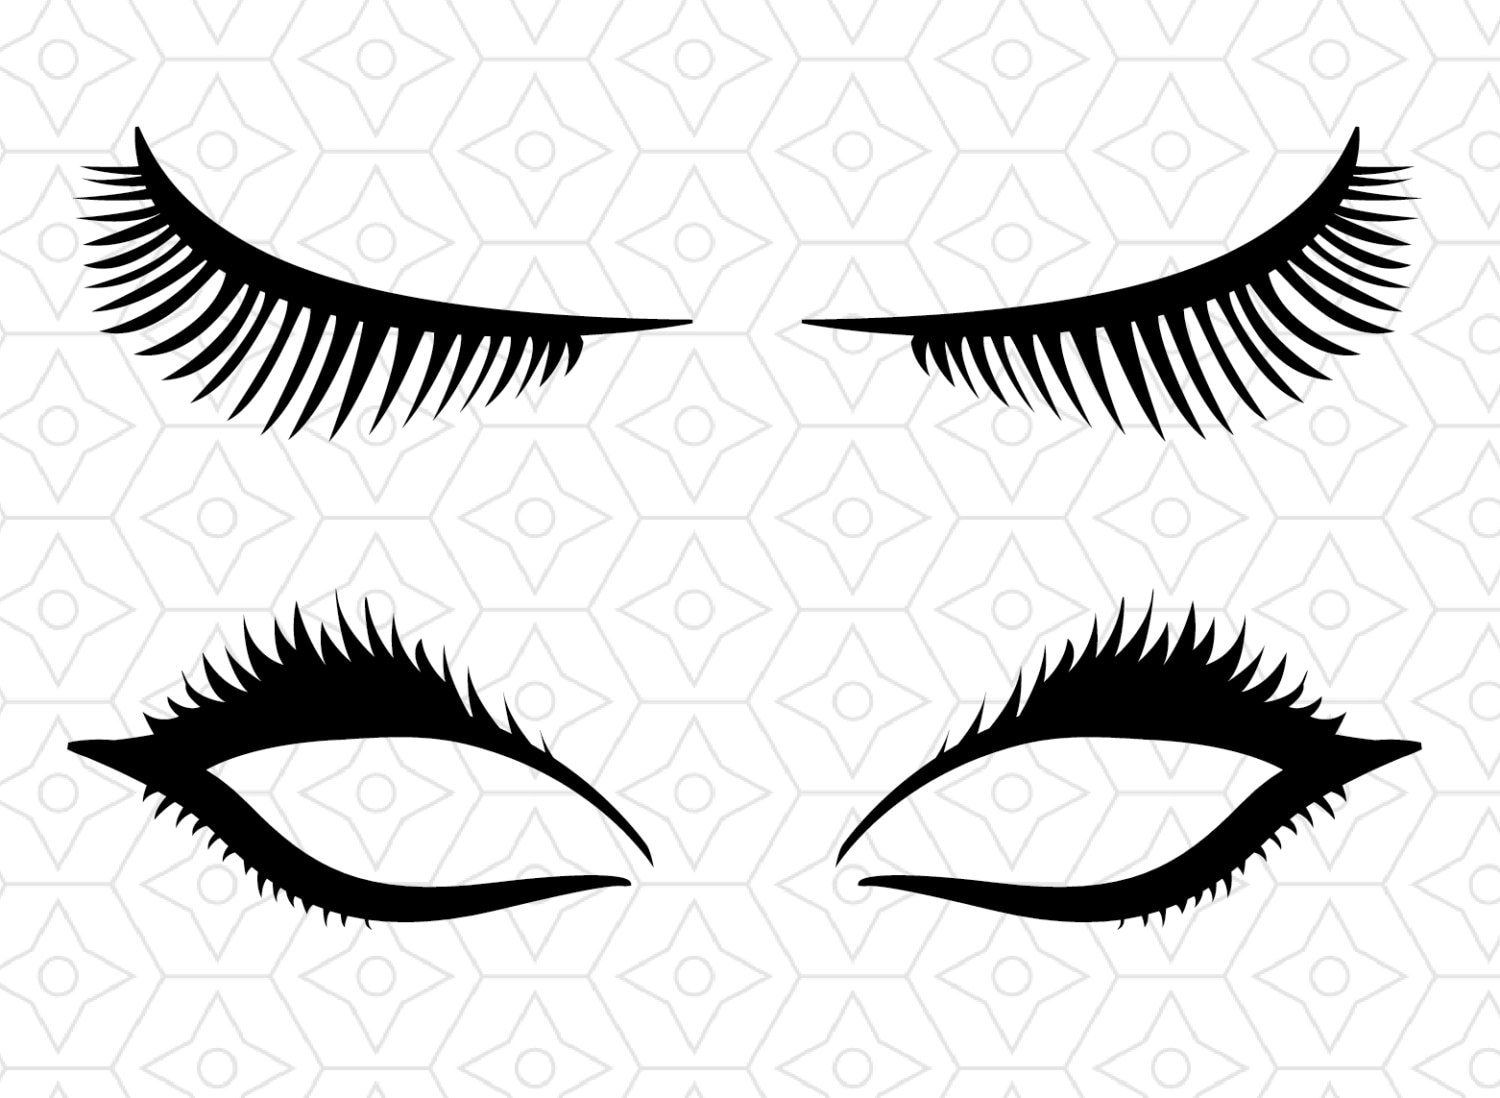 Download Eyelashes Decal Design SVG DXF EPS vector files for use